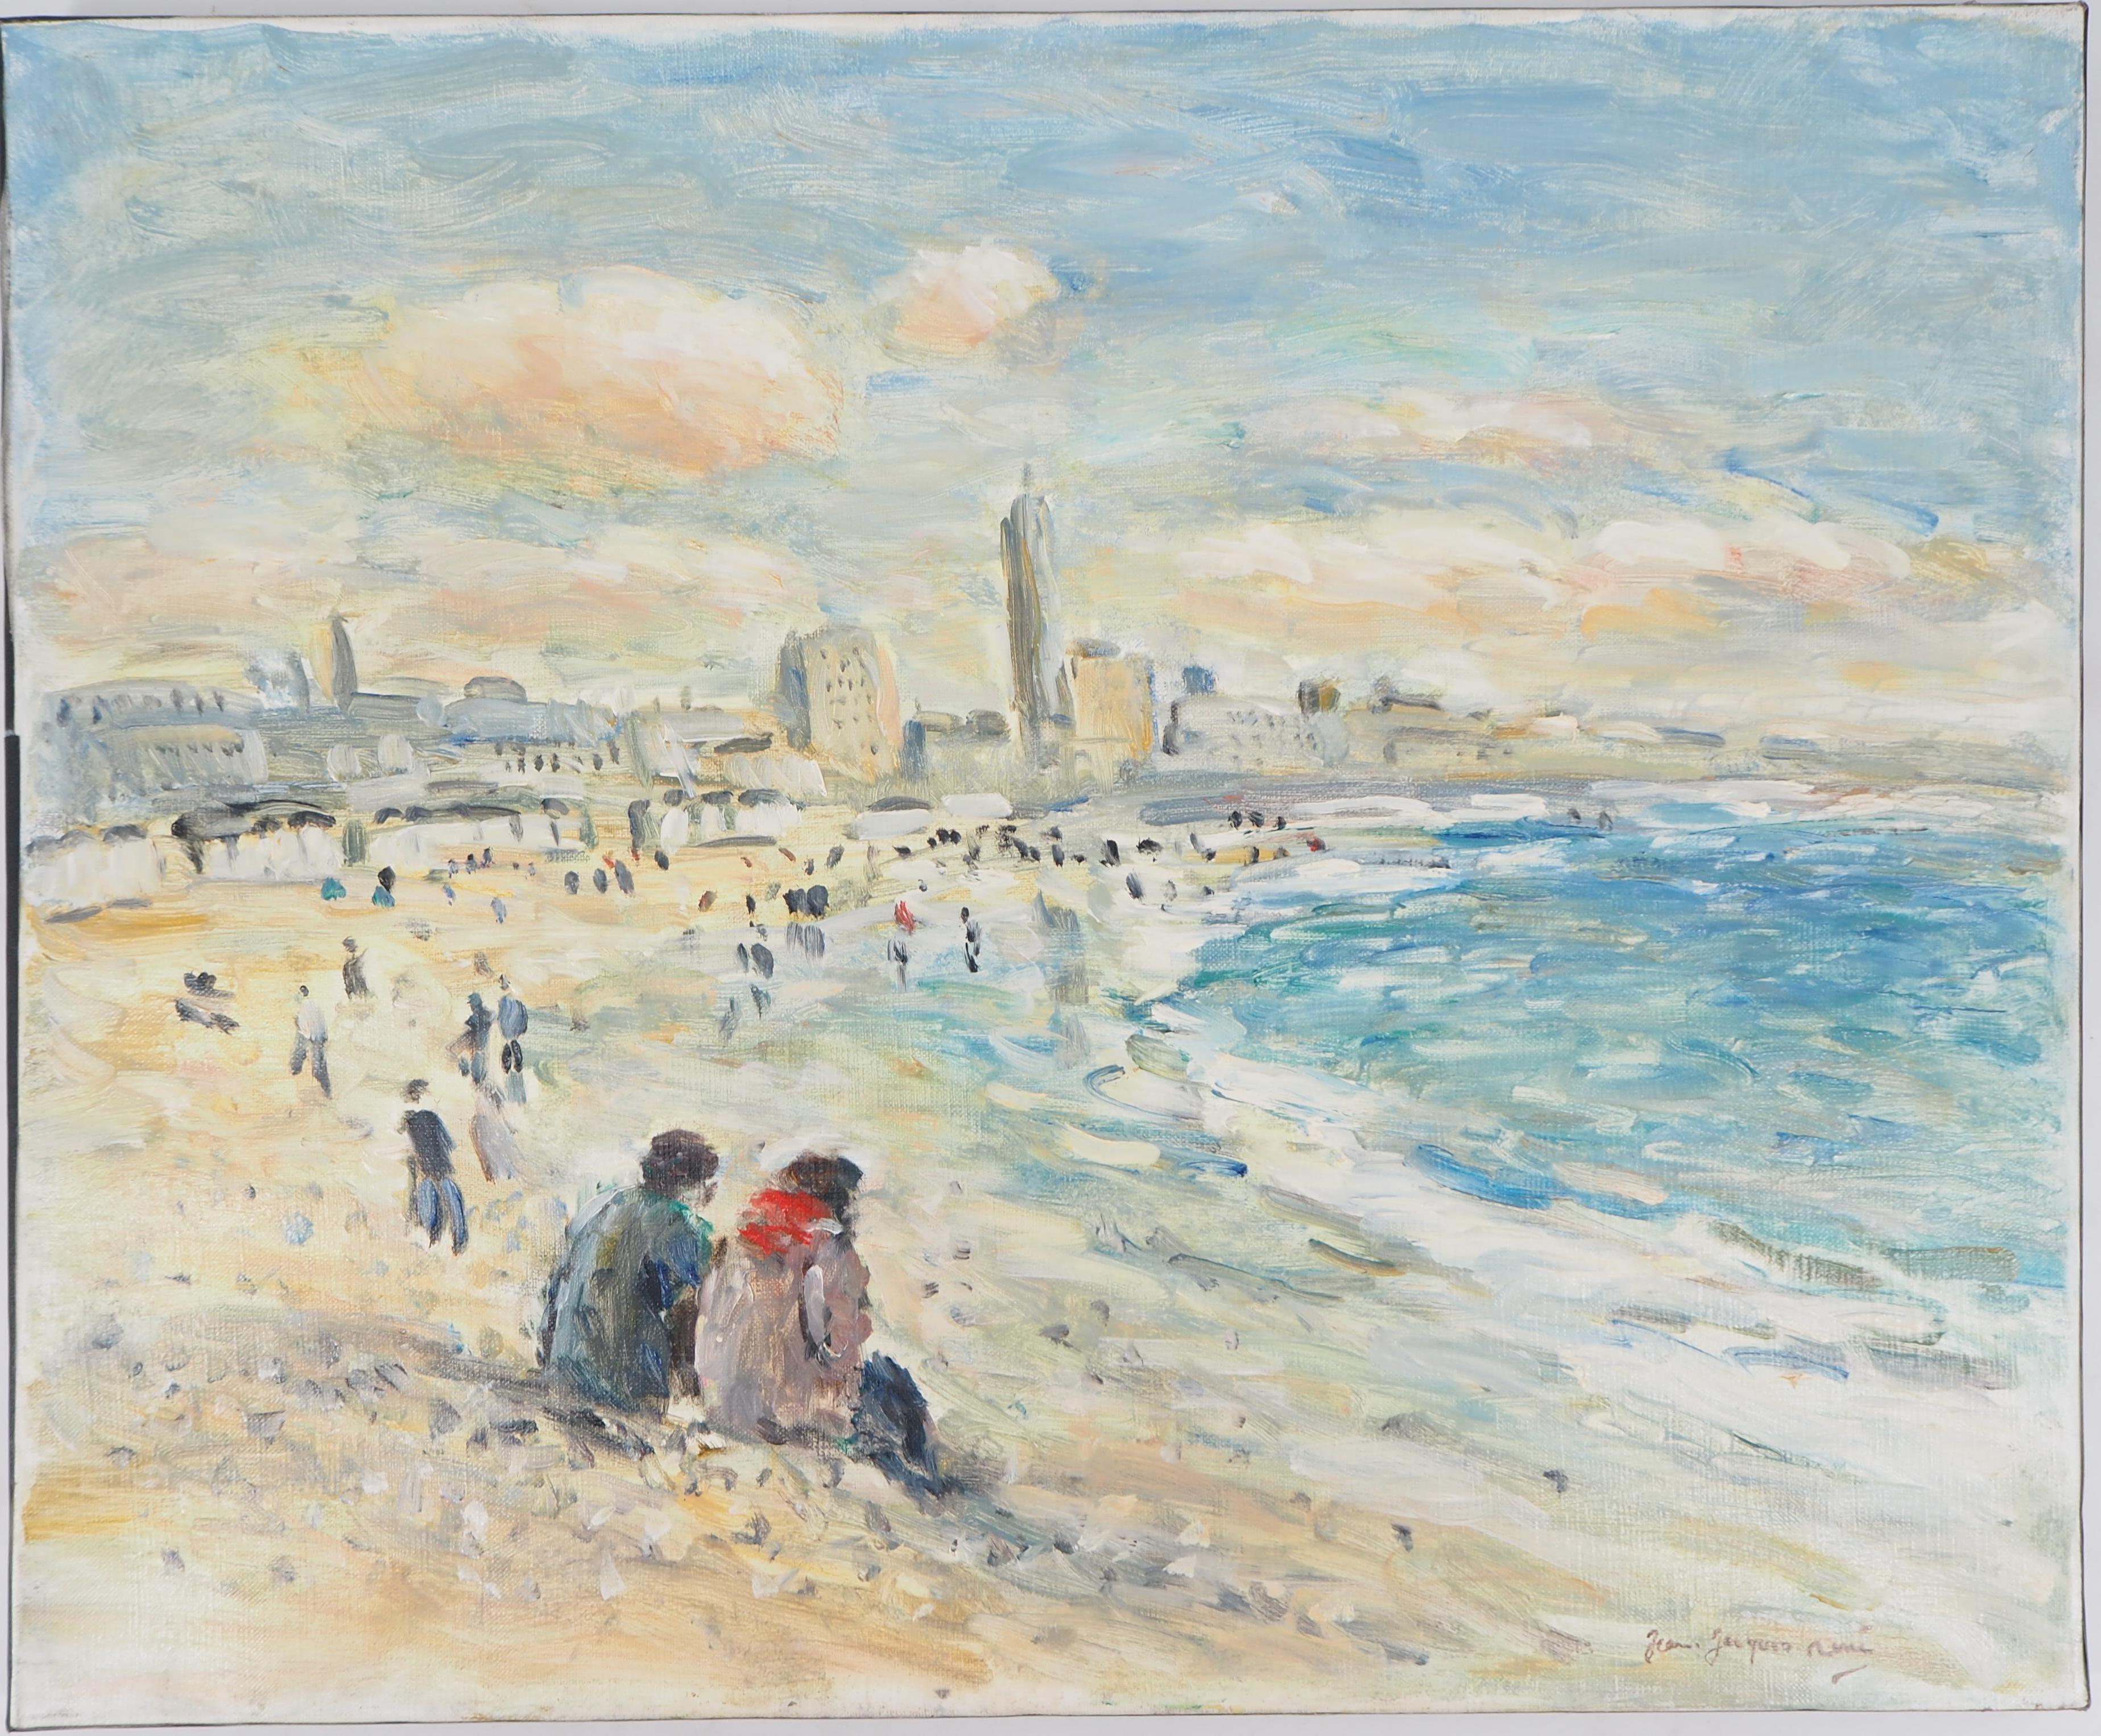 Jean Jacques Rene Landscape Painting - Le Havre : The Beach at Low Tide - Oil On Canvas Hansigned